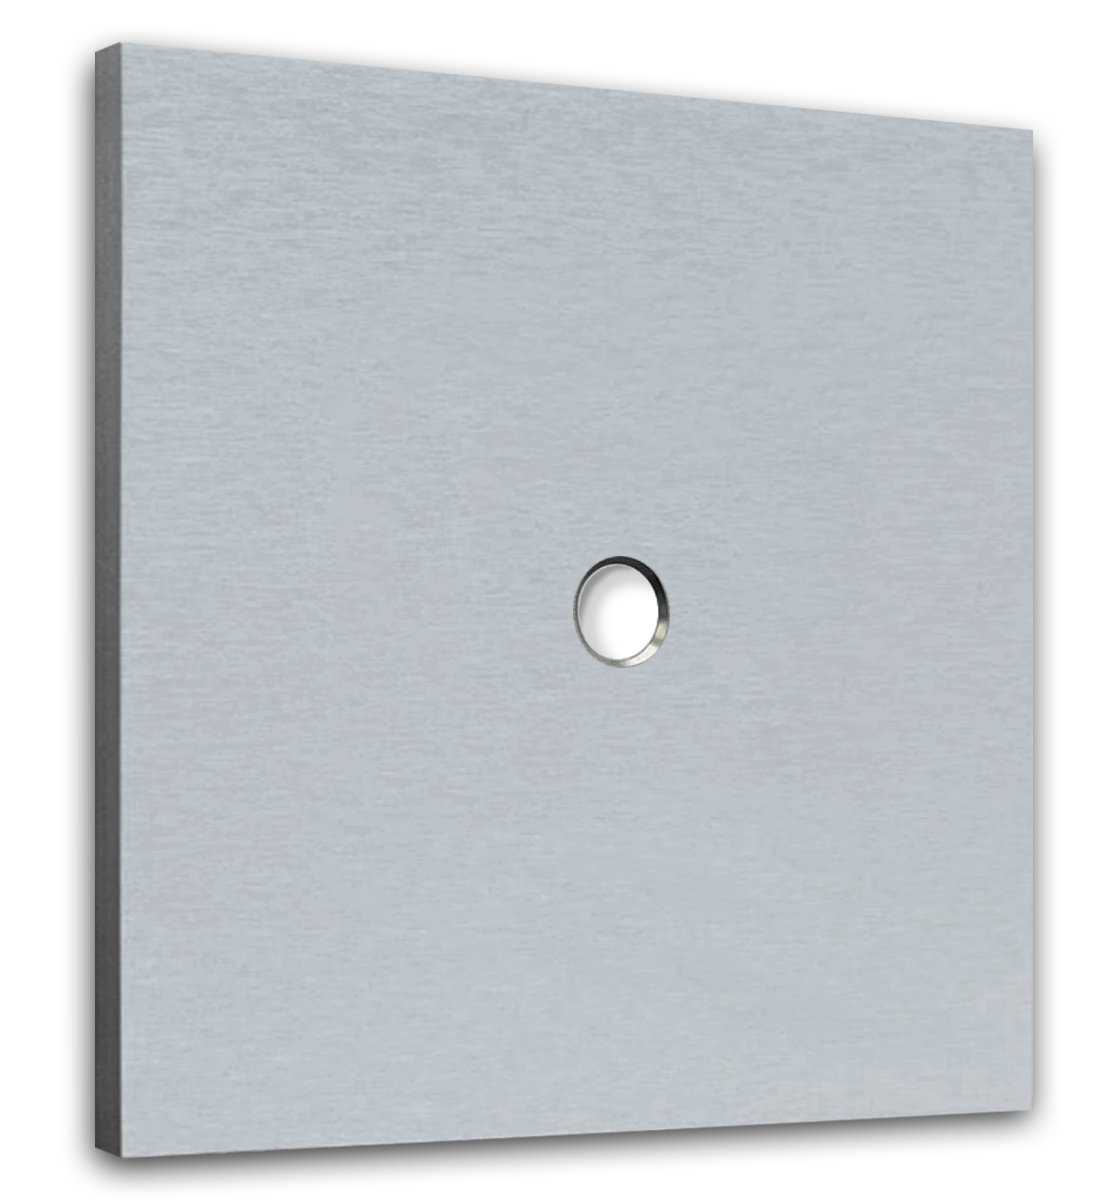 Retro toggle switch plate NINA 1-Gang. Aluminum metal. CJC Systems